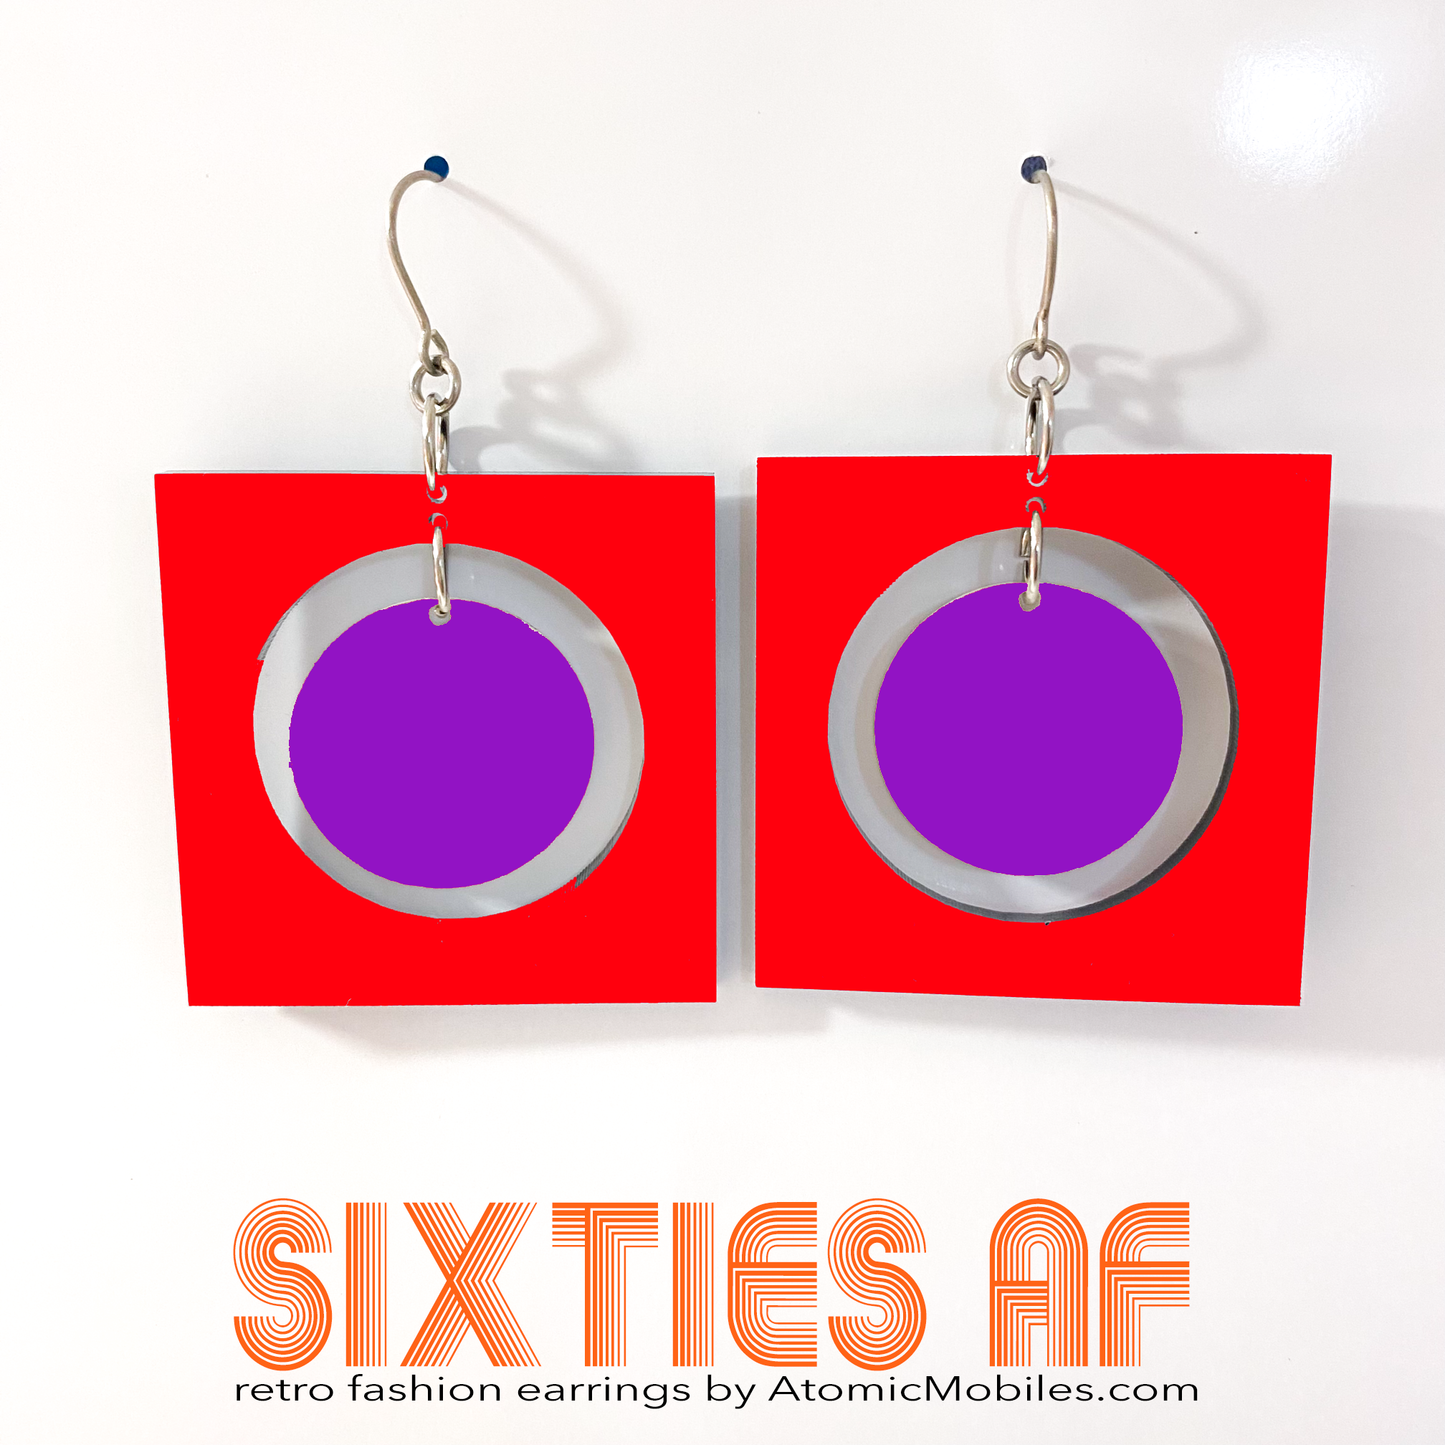 SIXTIES AF groovy retro fashion earrings inspired by the 1960s in red and purple - by AtomicMobiles.com